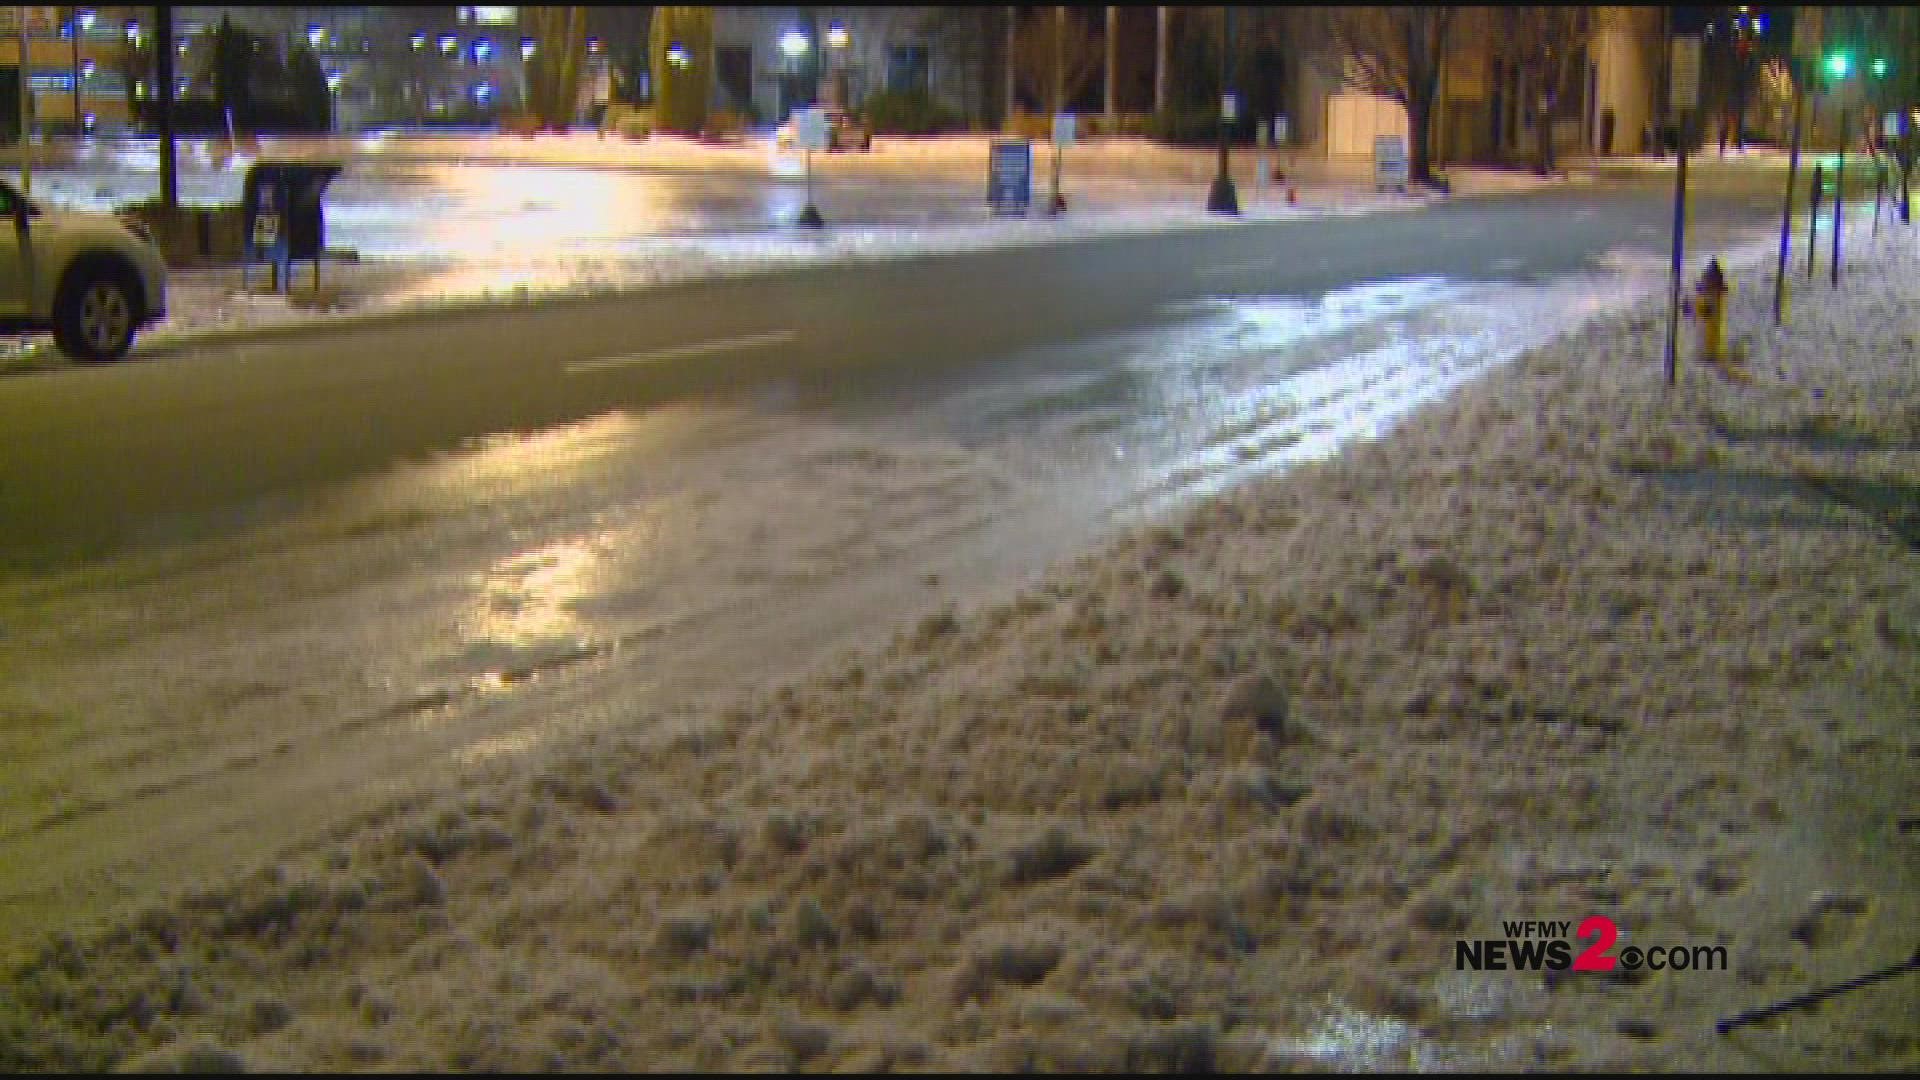 Two days after the winter storm, many secondary roads remain a concern due to dangerous black ice.